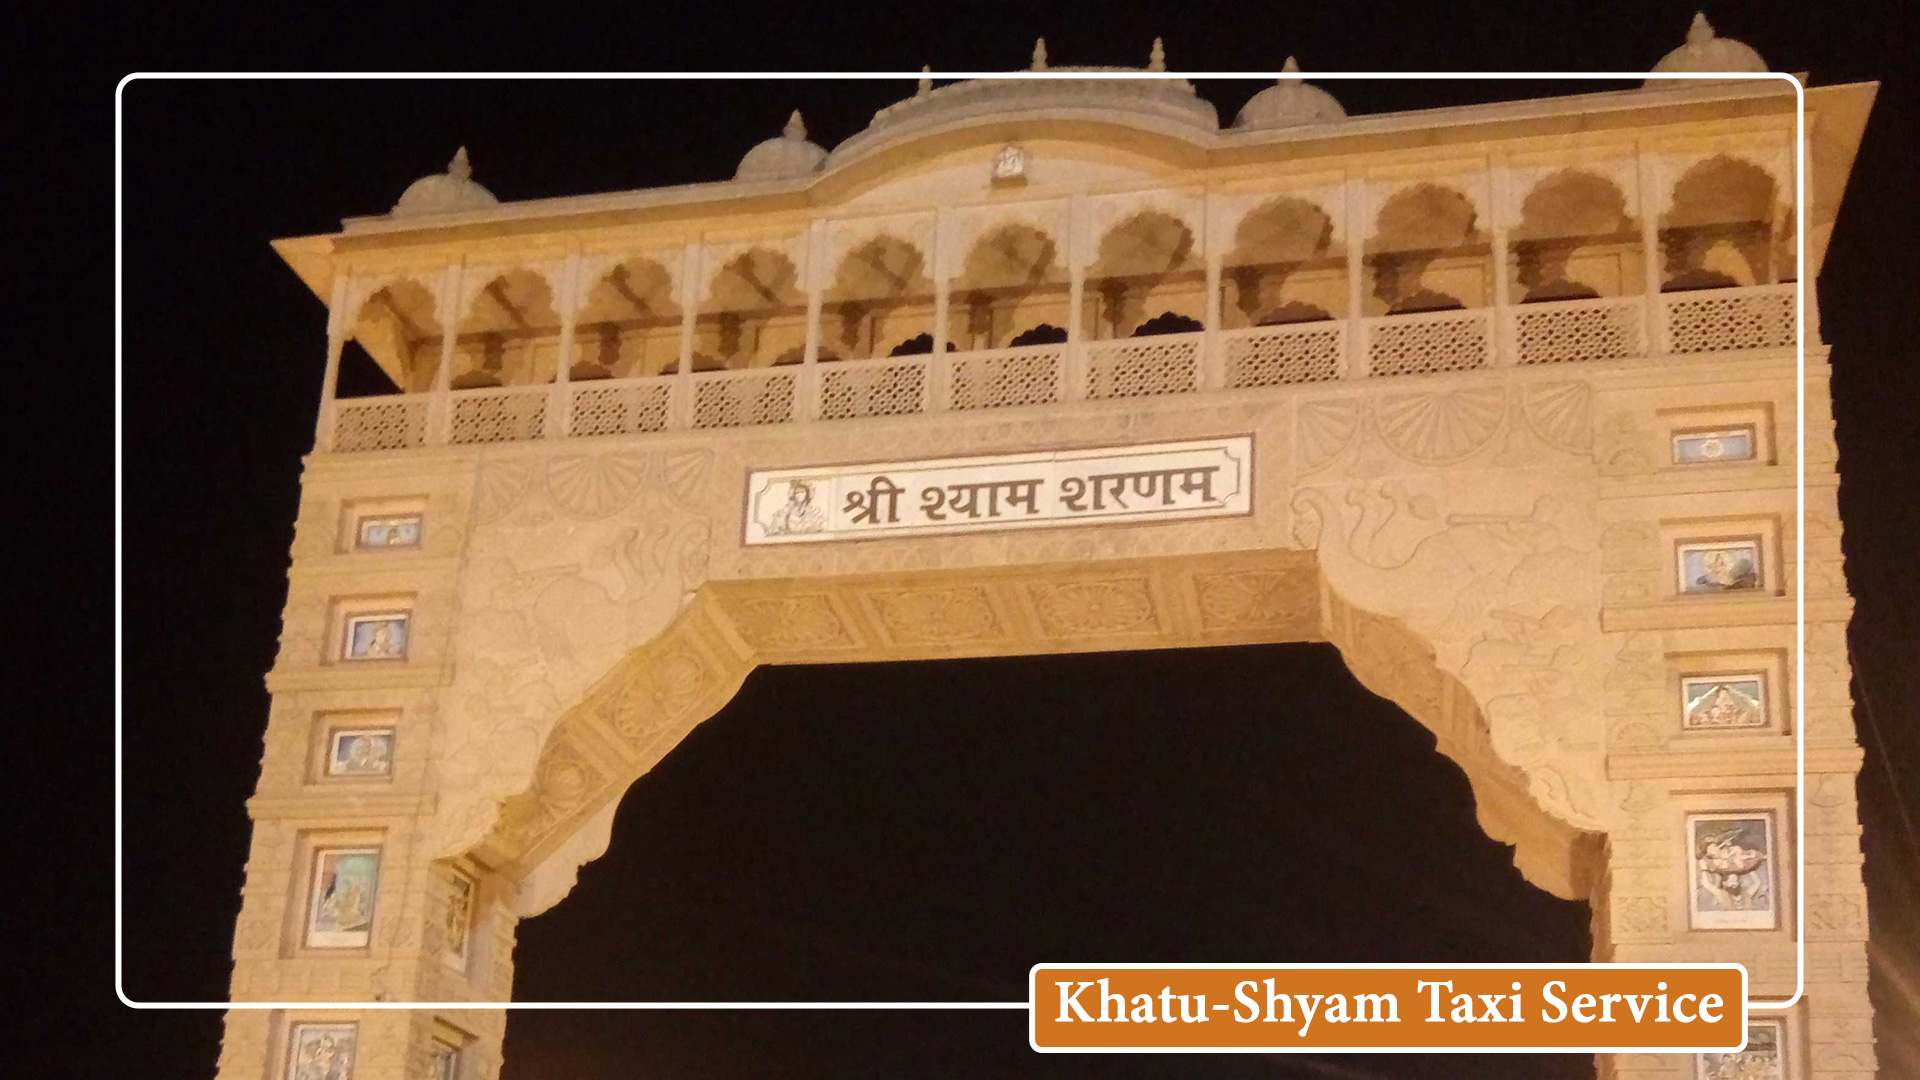 This image shows Jaipur to Khatu Shyamji Taxi service with beautiful view of Khatu Shyam Gate.>
              </div>
            </div>
          </div>
        </div>
      </section>

       <section class=